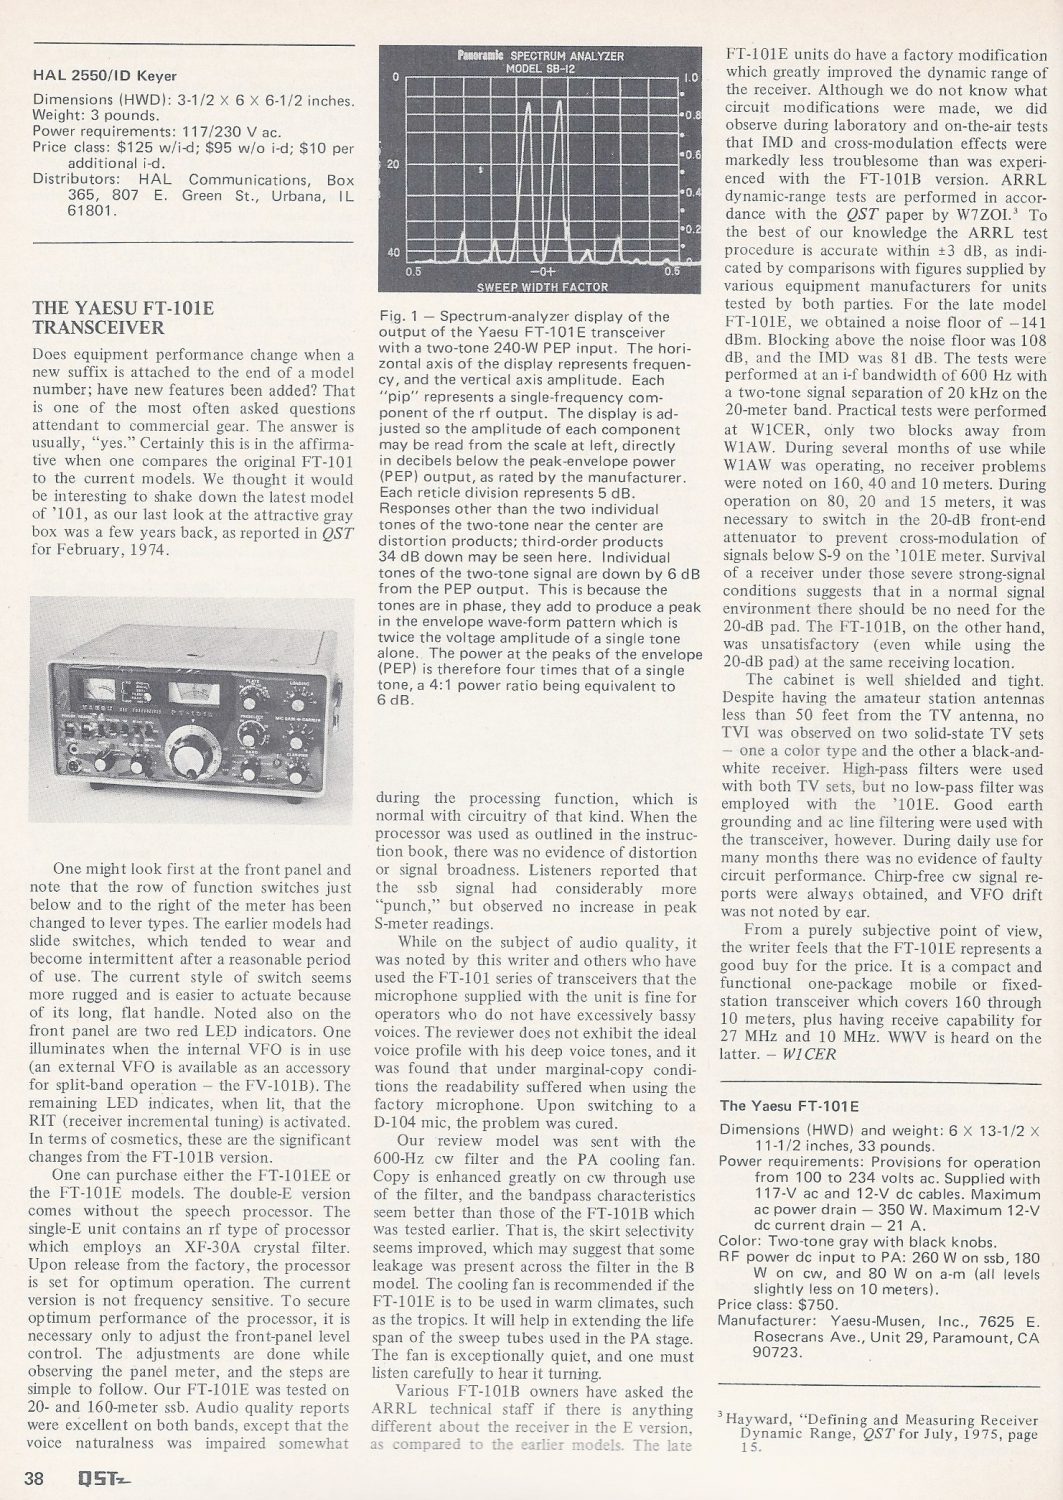 Review by W1CER (QST Magazine 1976-02)